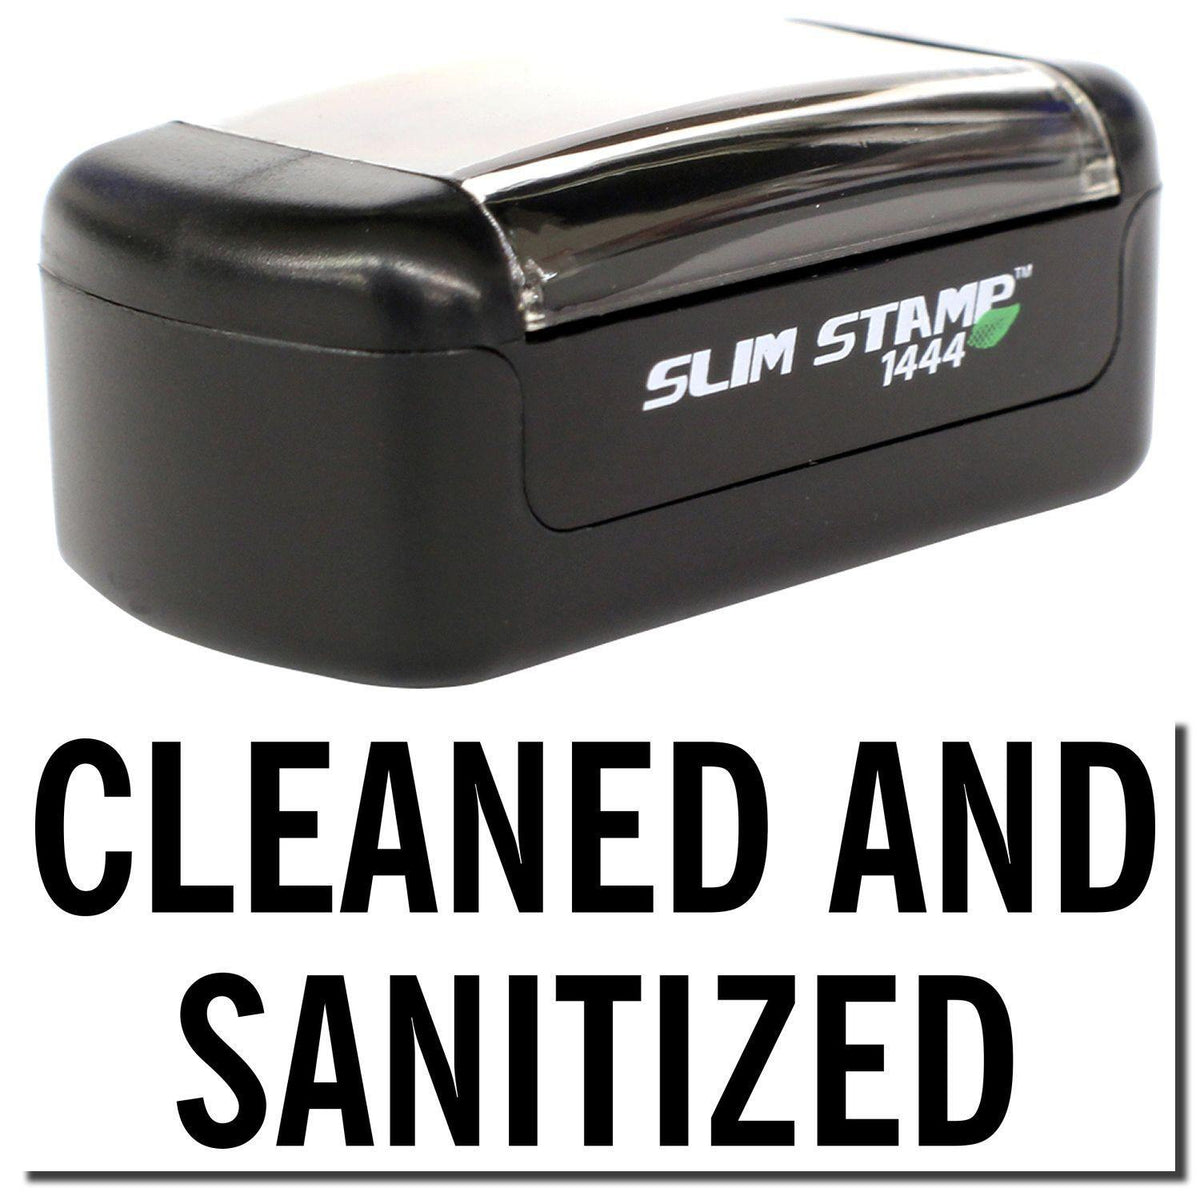 A stock office pre-inked stamp with a stamped image showing how the text &quot;CLEANED AND SANITIZED&quot; is displayed after stamping.